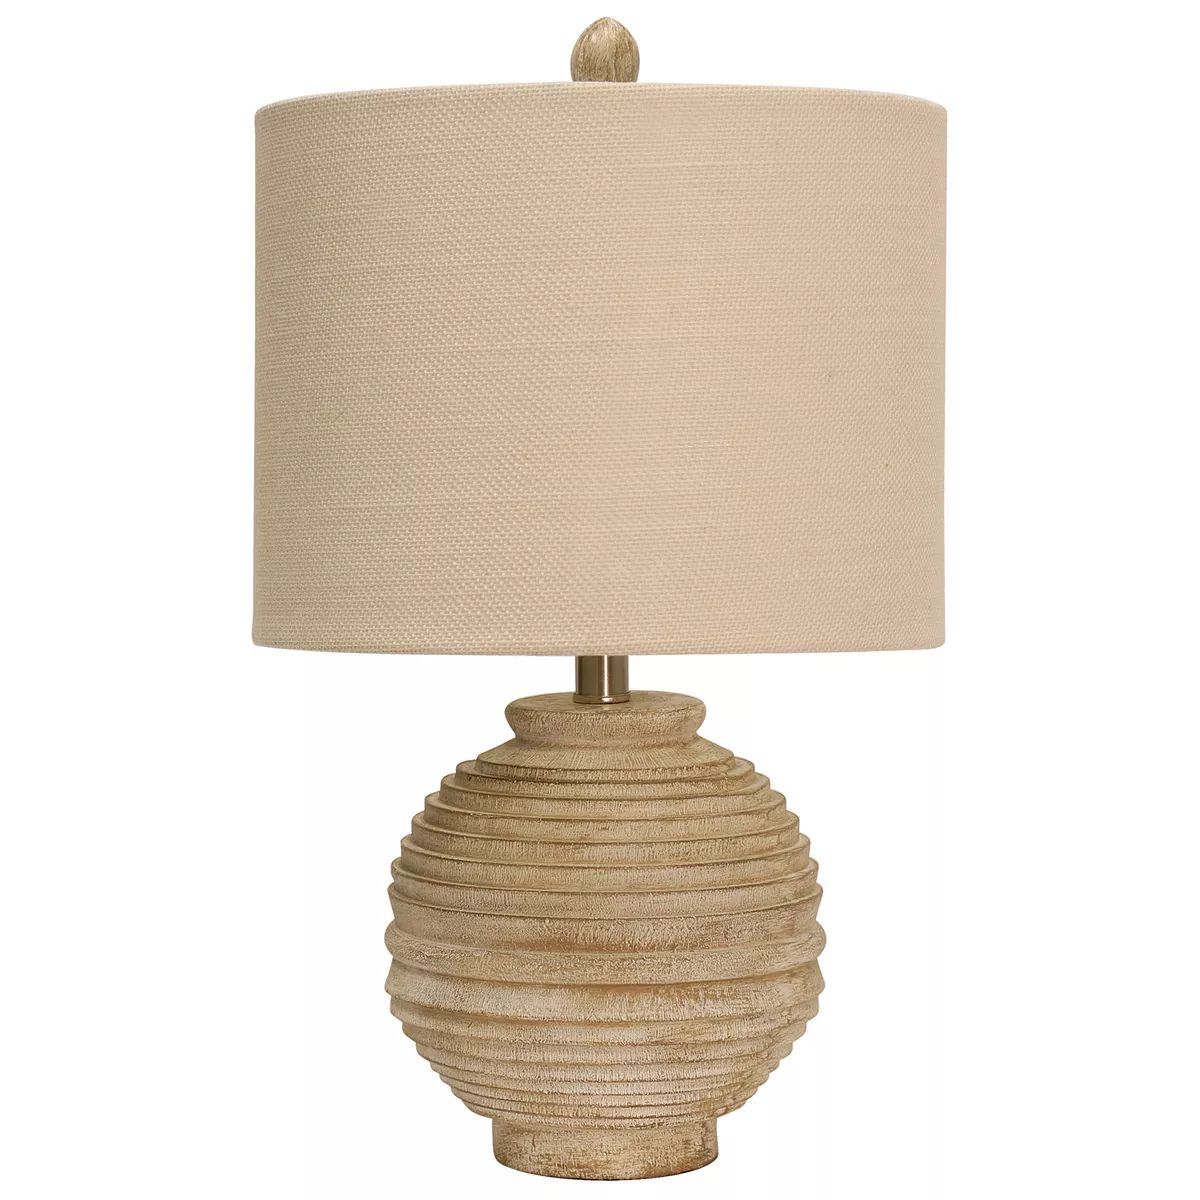 Distressed Faux Wood Round Table Lamp | Kohl's